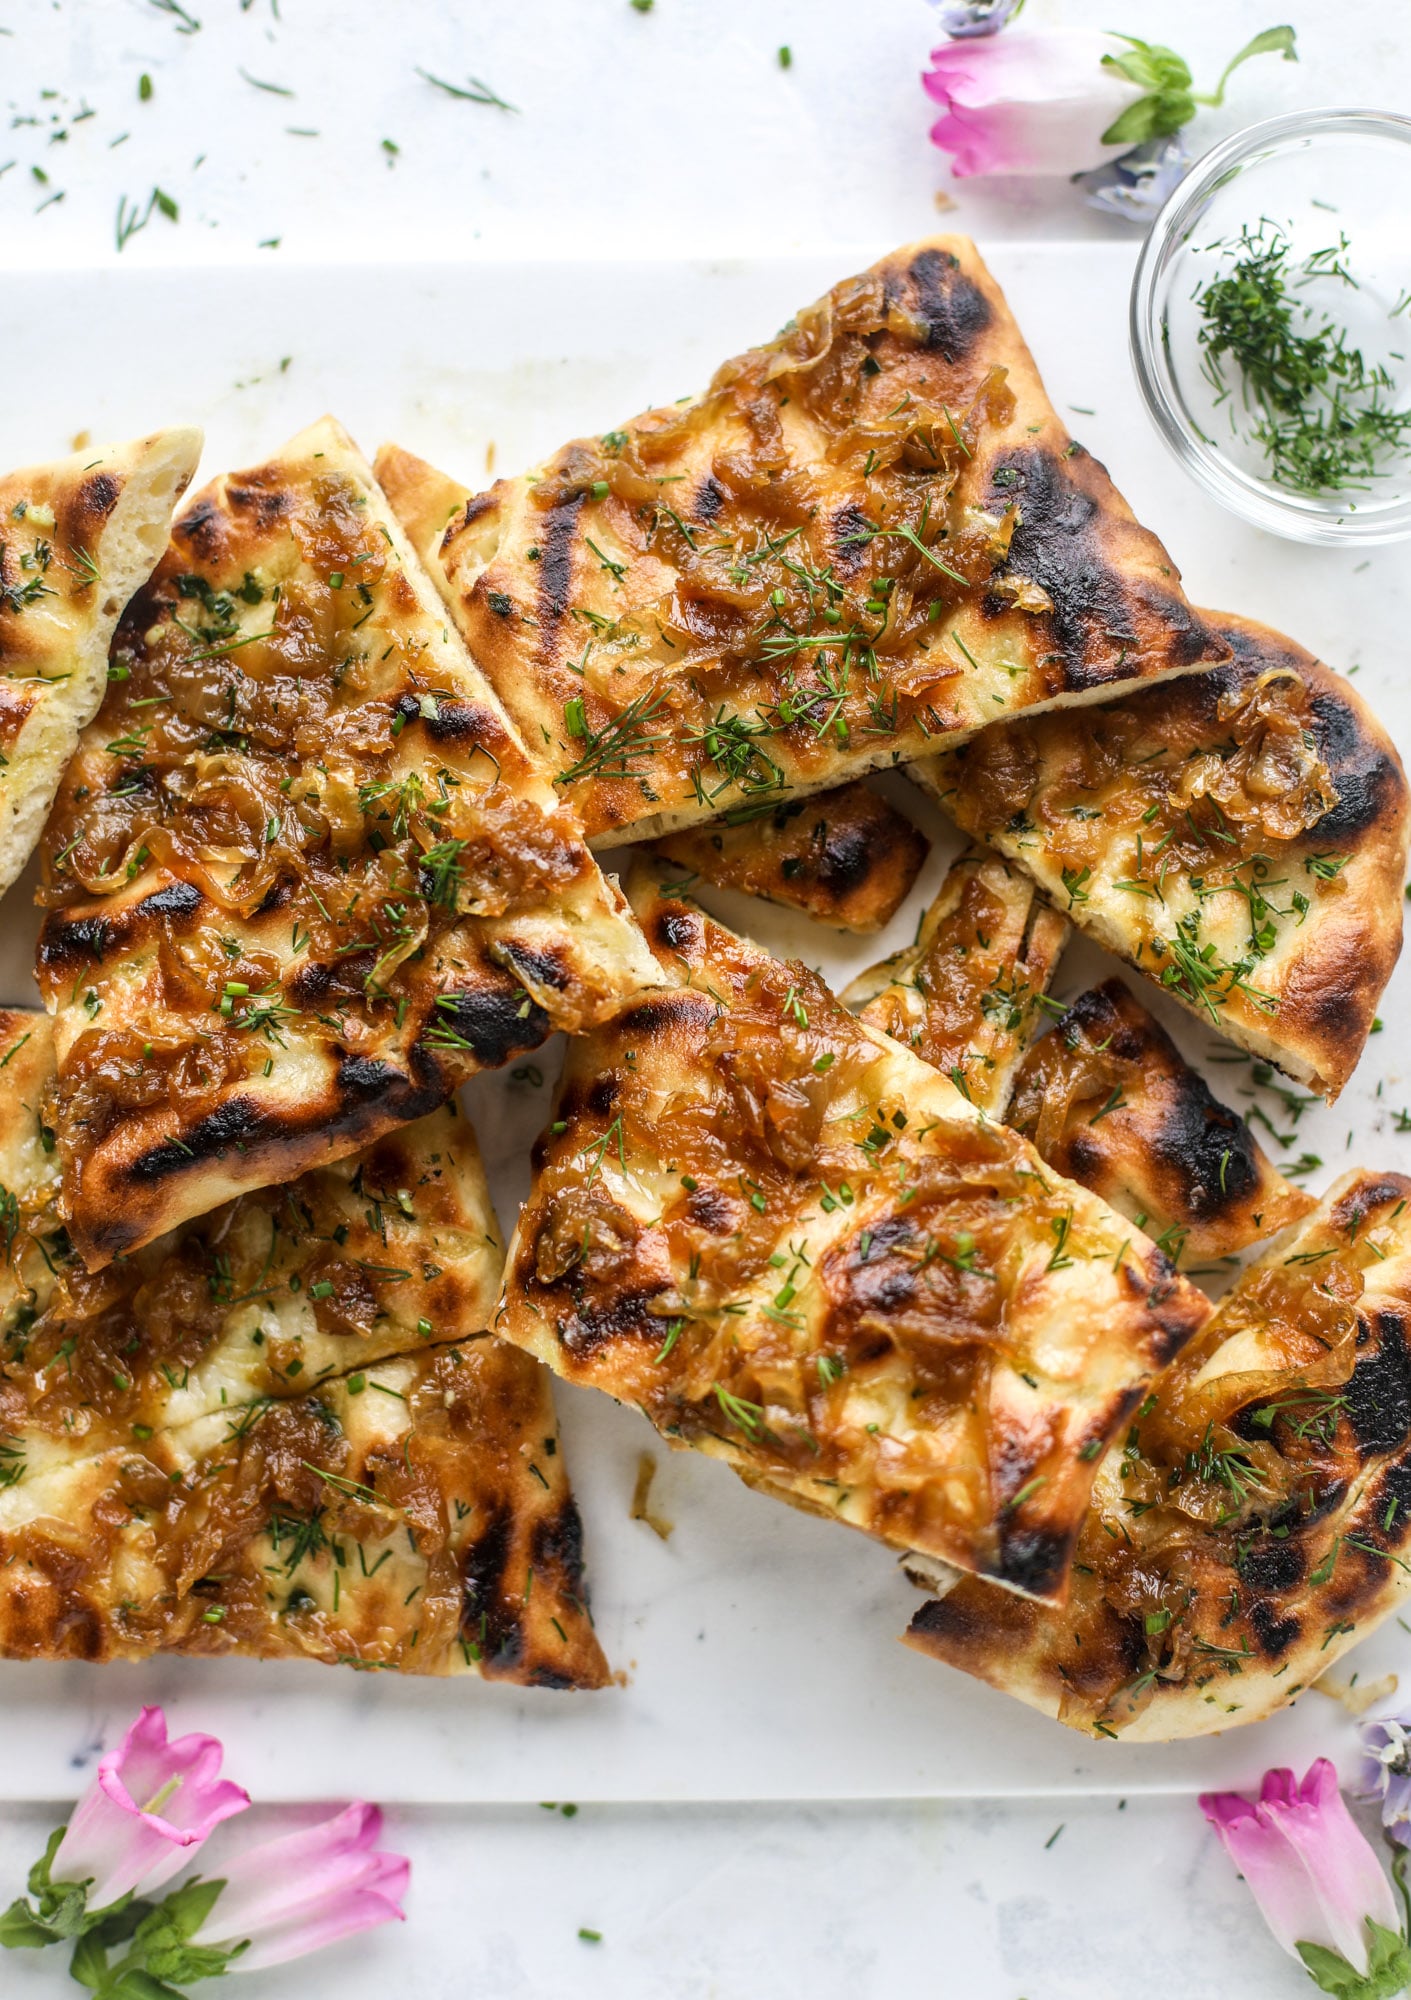 Grilled focaccia bread is such a treat! Topped with puddles of garlic butter, fresh chopped herbs and golden, caramelized onions, it's a slice of heaven.